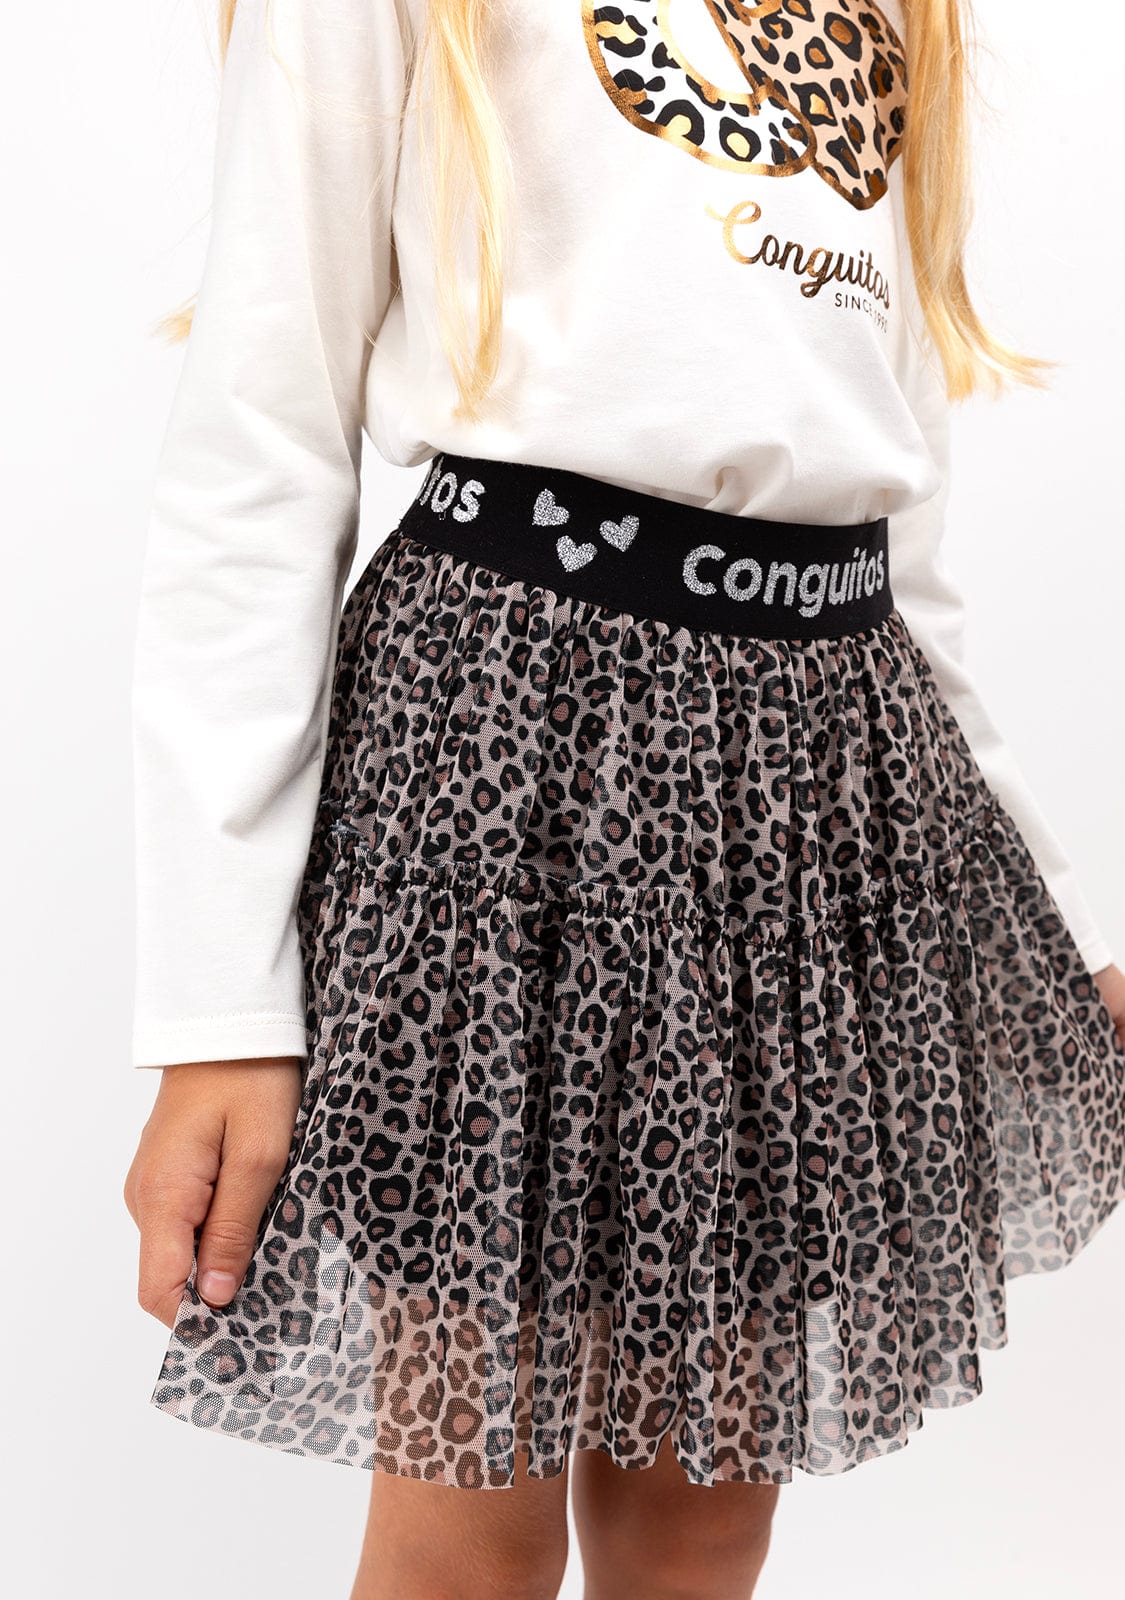 CONGUITOS TEXTIL Clothing Girl's Leopard Tulle Conguitos Skirt